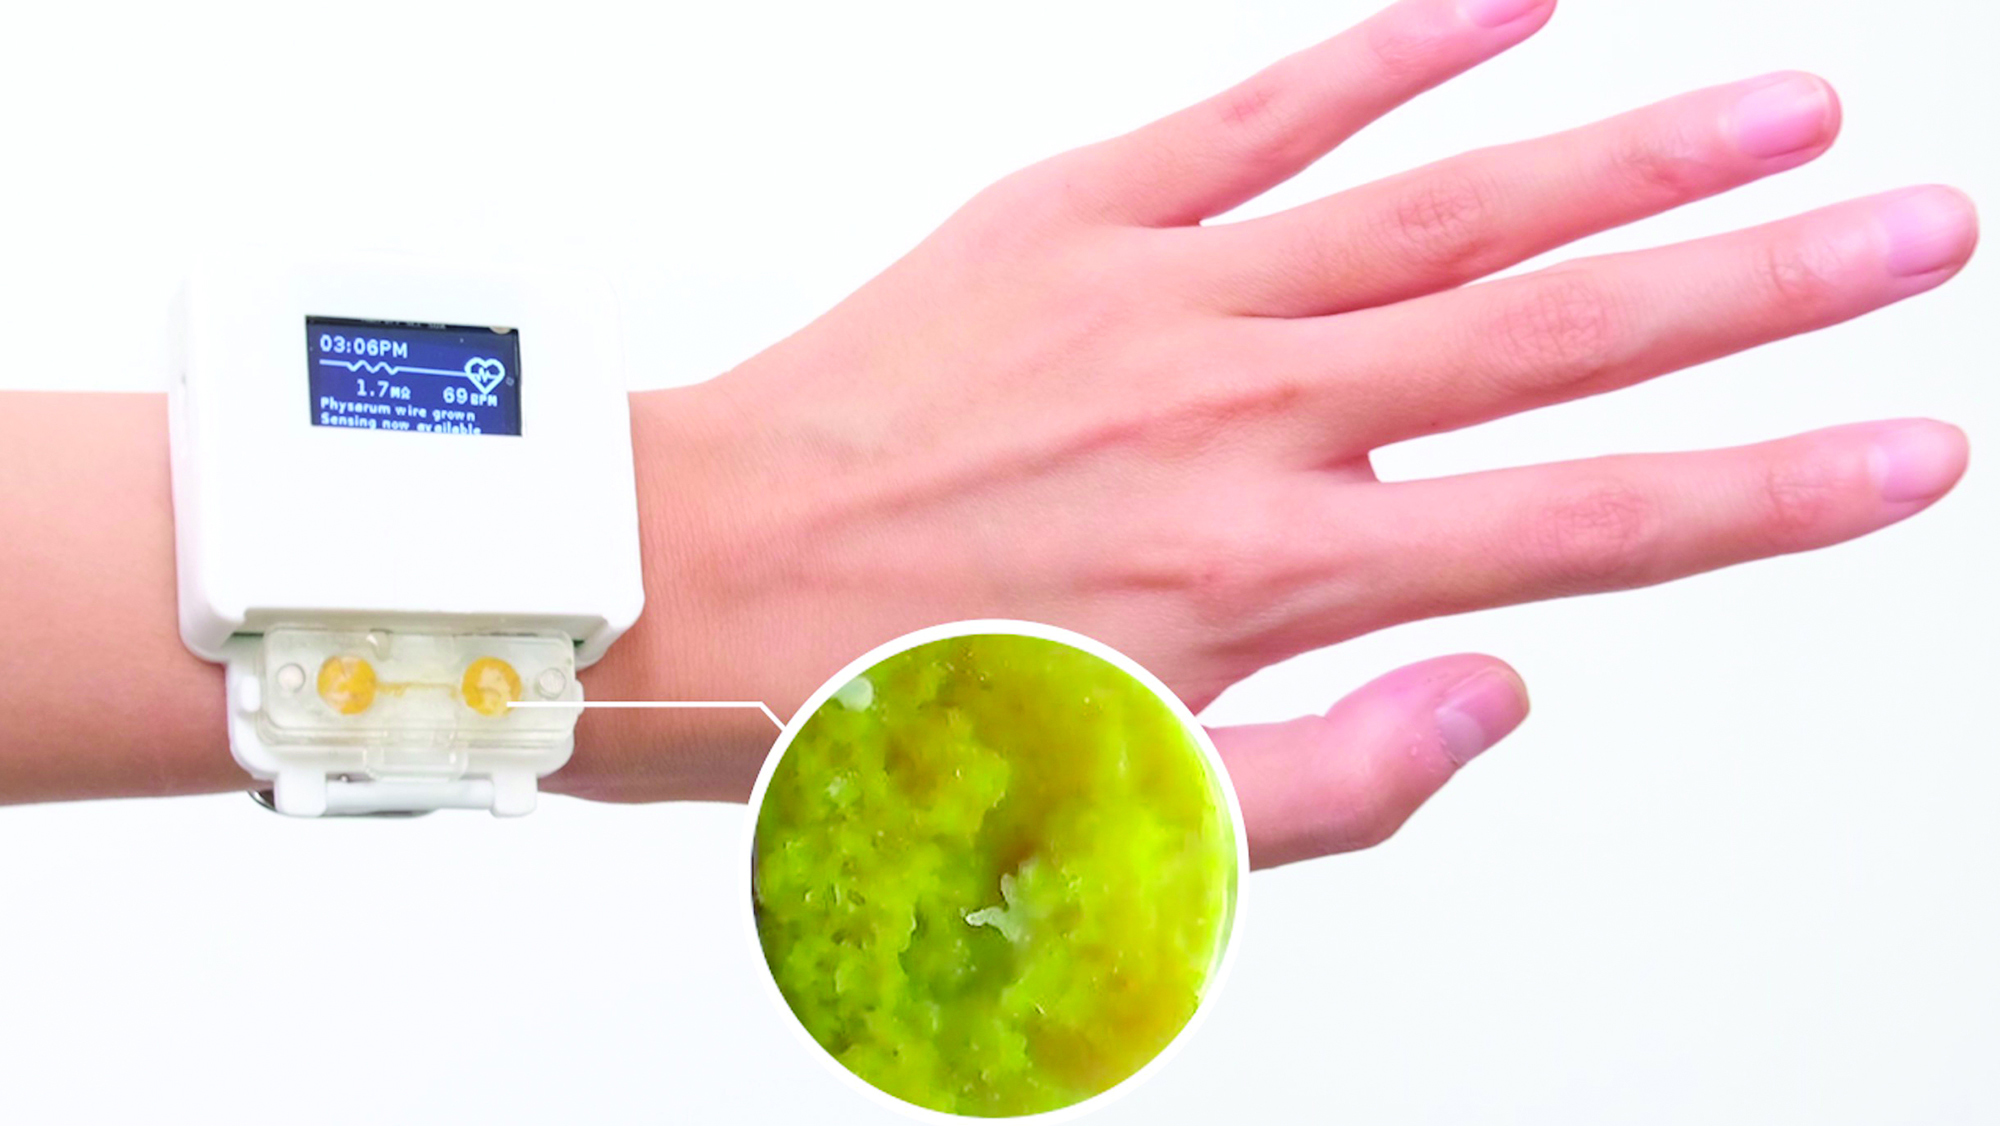 The Human Computer Integration Lab's smartwatch that is activated by slime mold